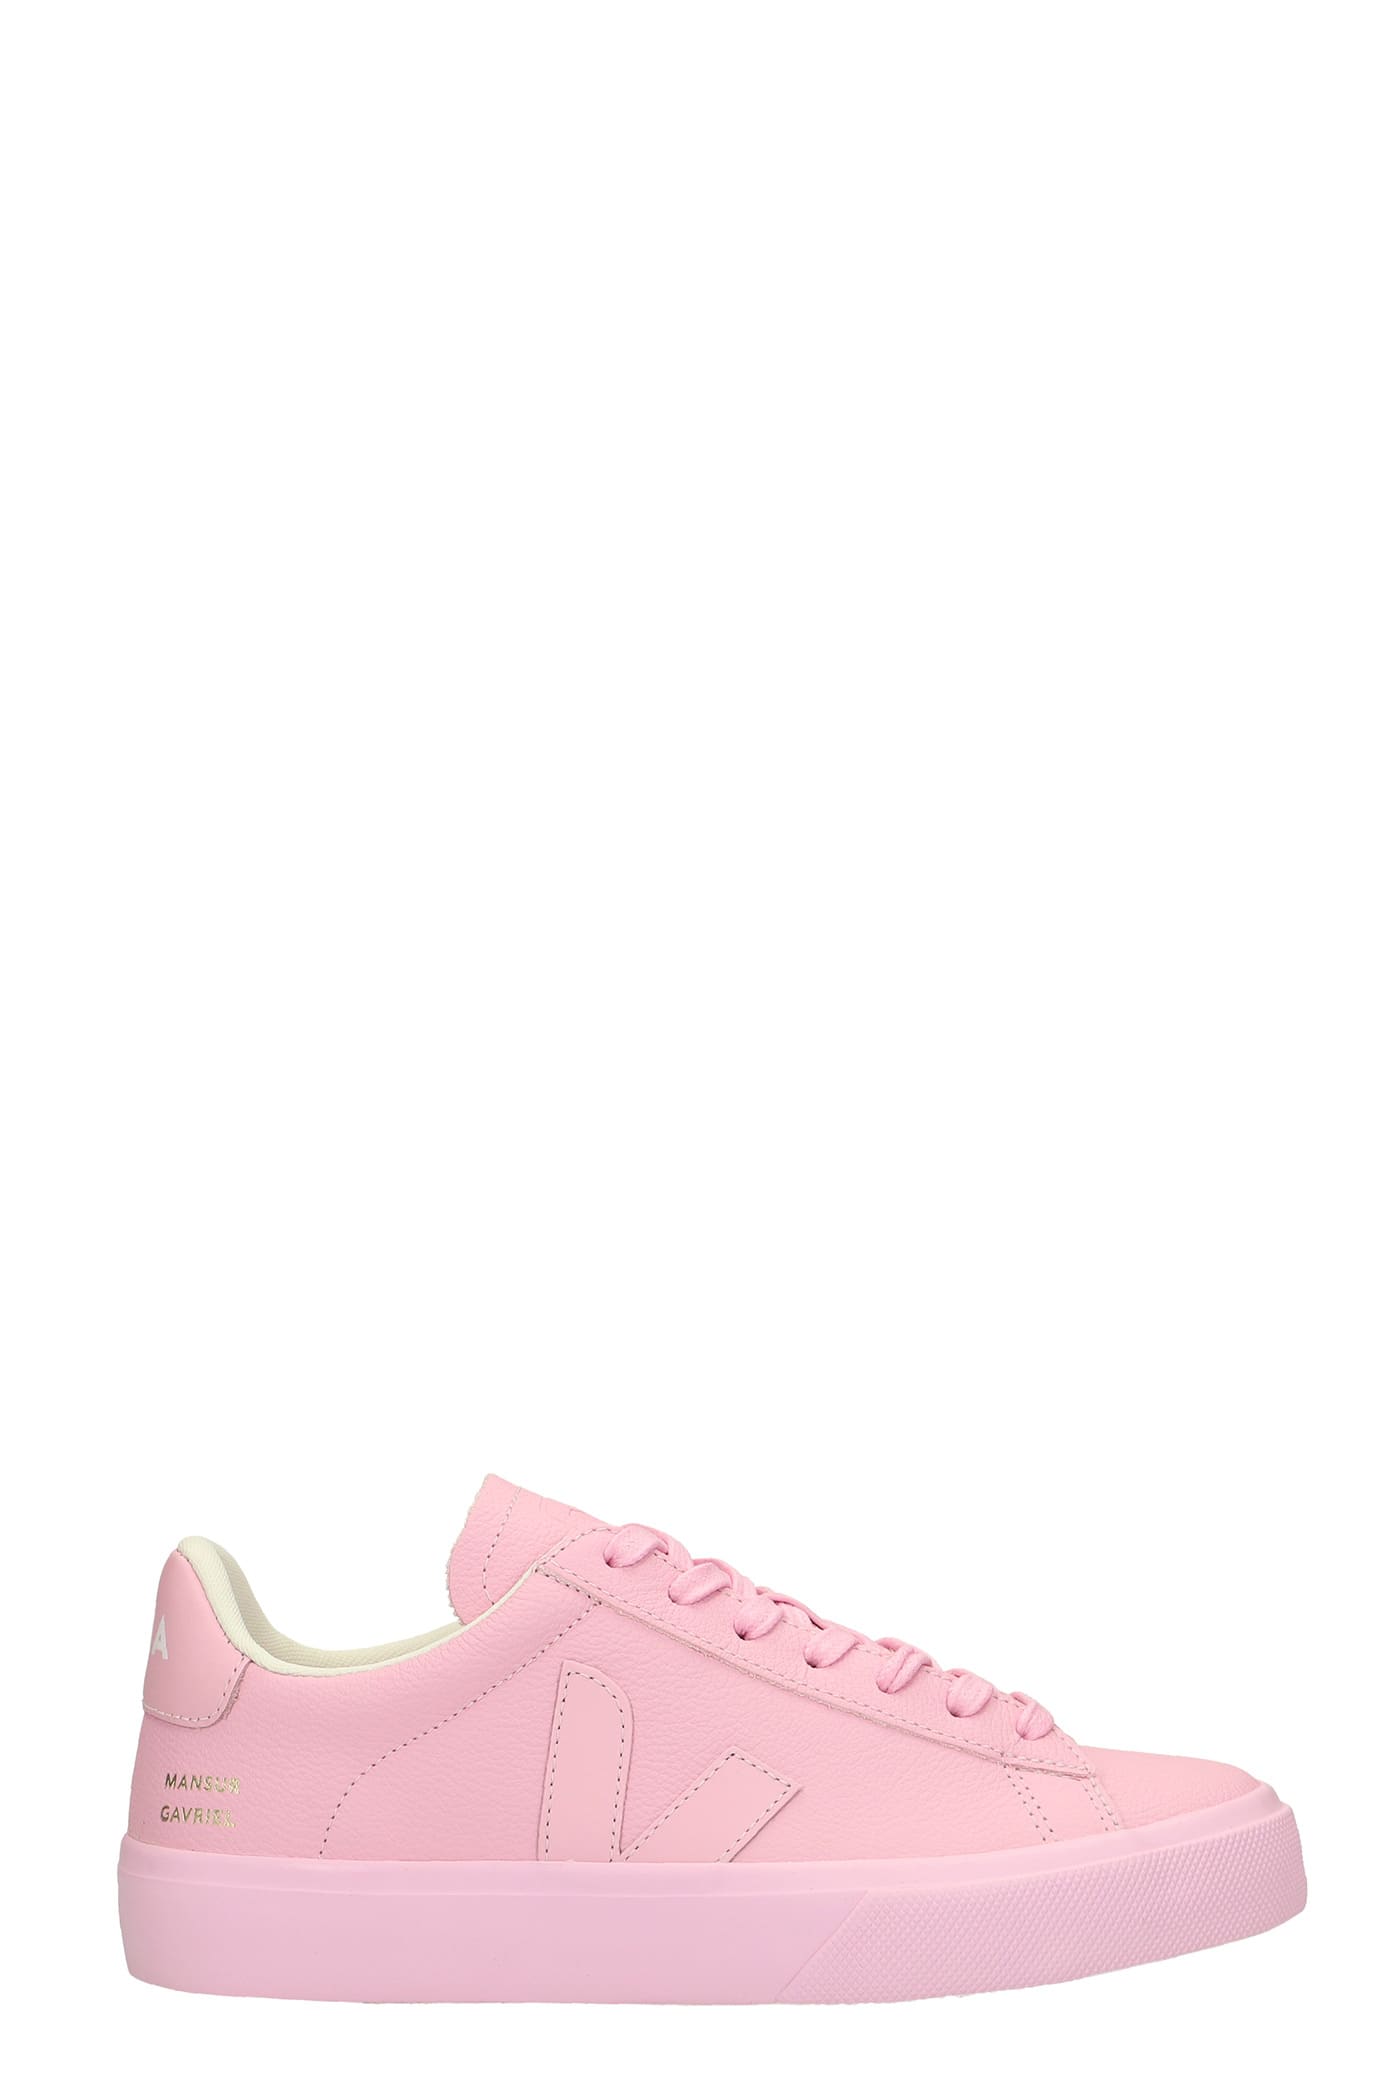 Veja Campo Sneakers In Rose-pink Leather